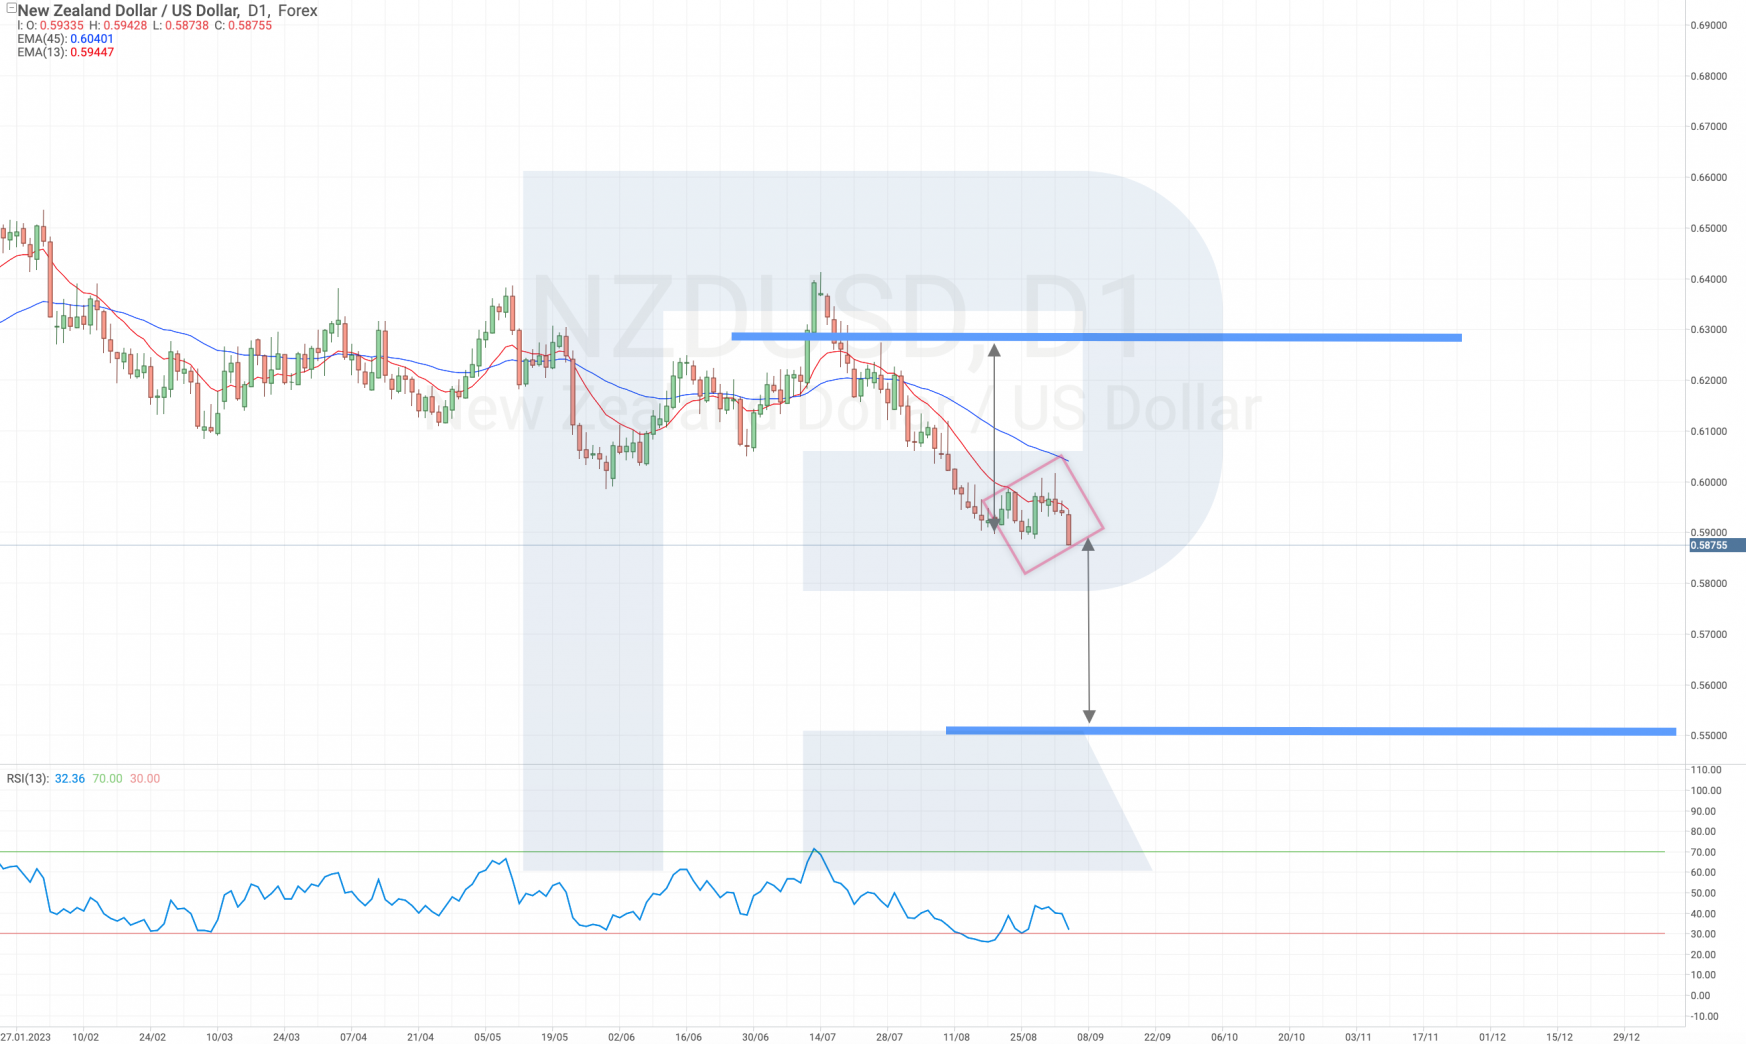 Technical analysis of the NZD/USD currency pair